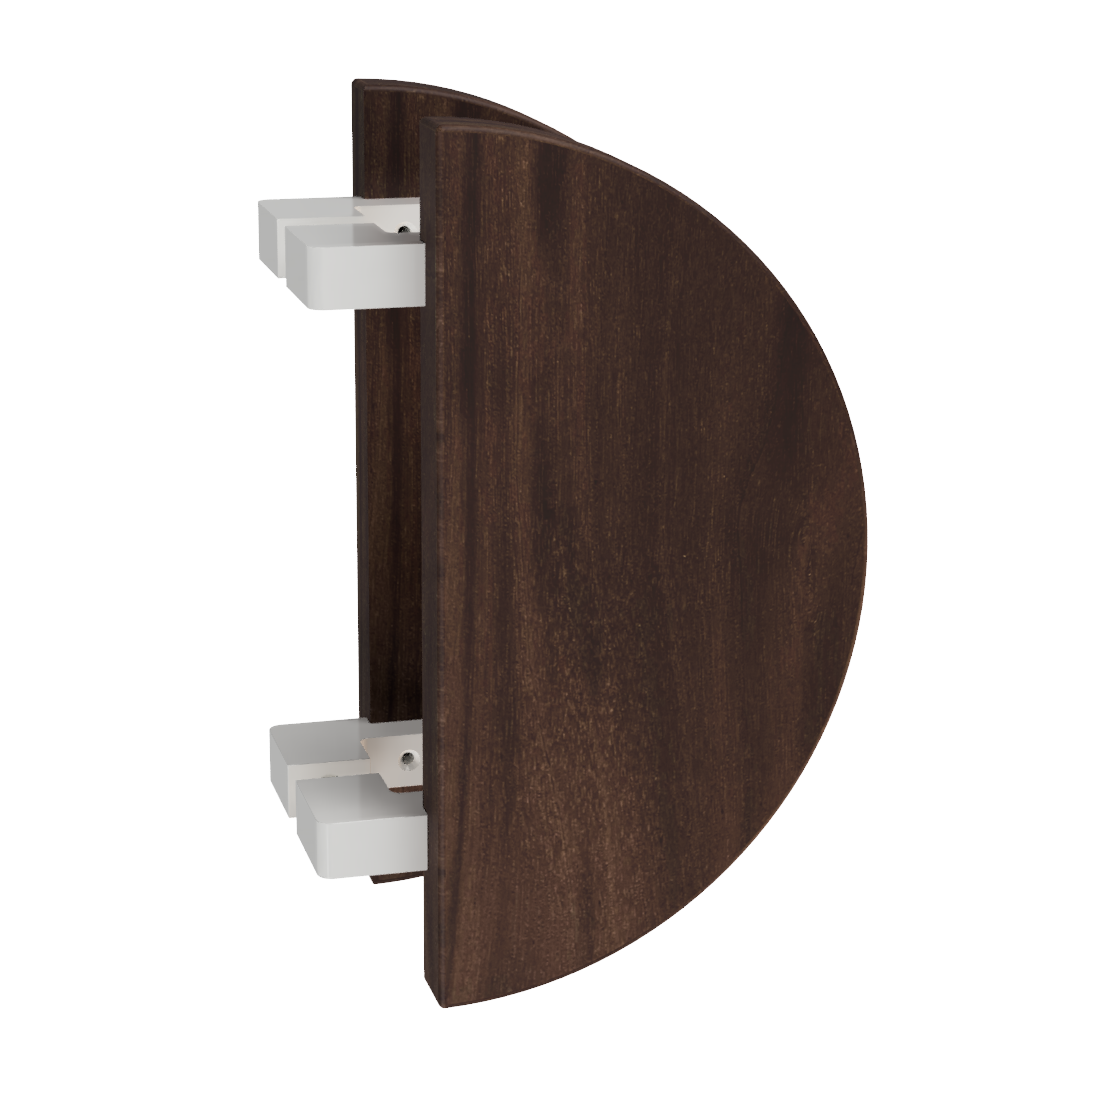 Pair T02 Offset Timber Entrance Pull Handle, American Walnut, Back to Back Pair, Ø300mm, Coated in Raw Timber (ready to stain or paint) in Walnut / Powder Coat